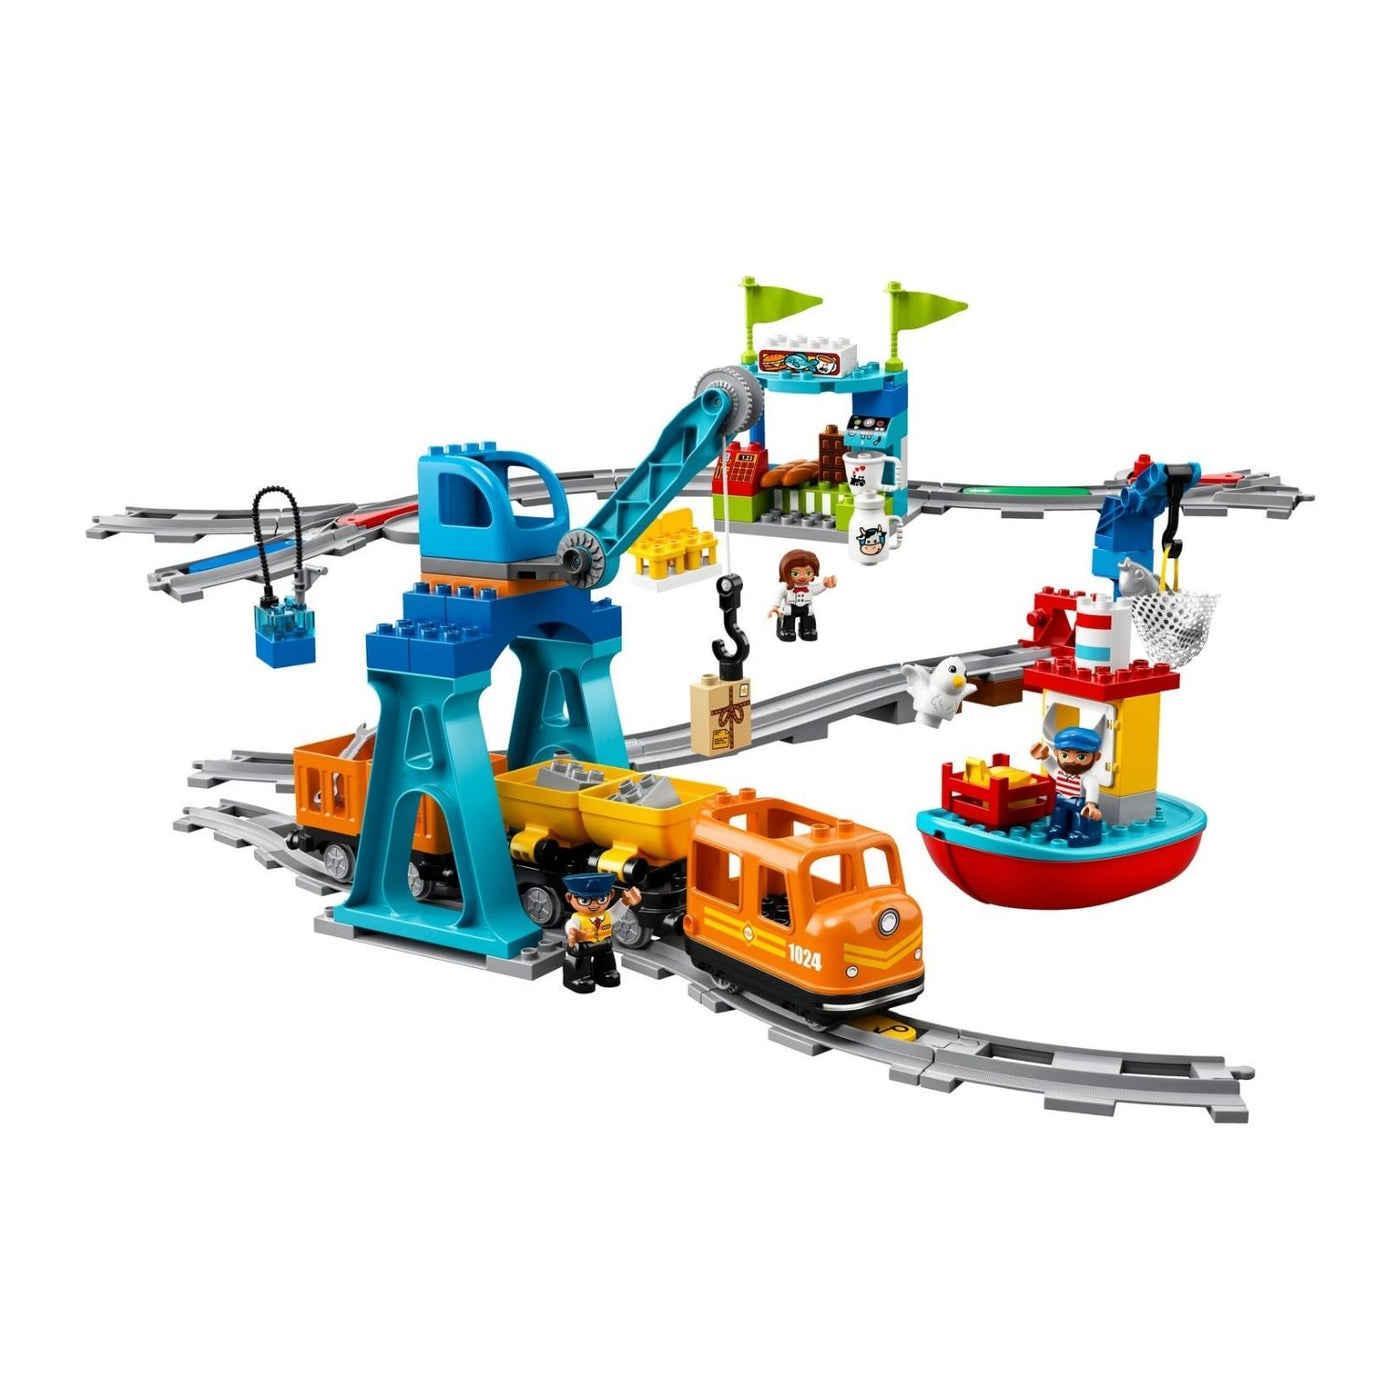 Unleash Your Creativity with DUPLO and Wooden Railroad Tracks